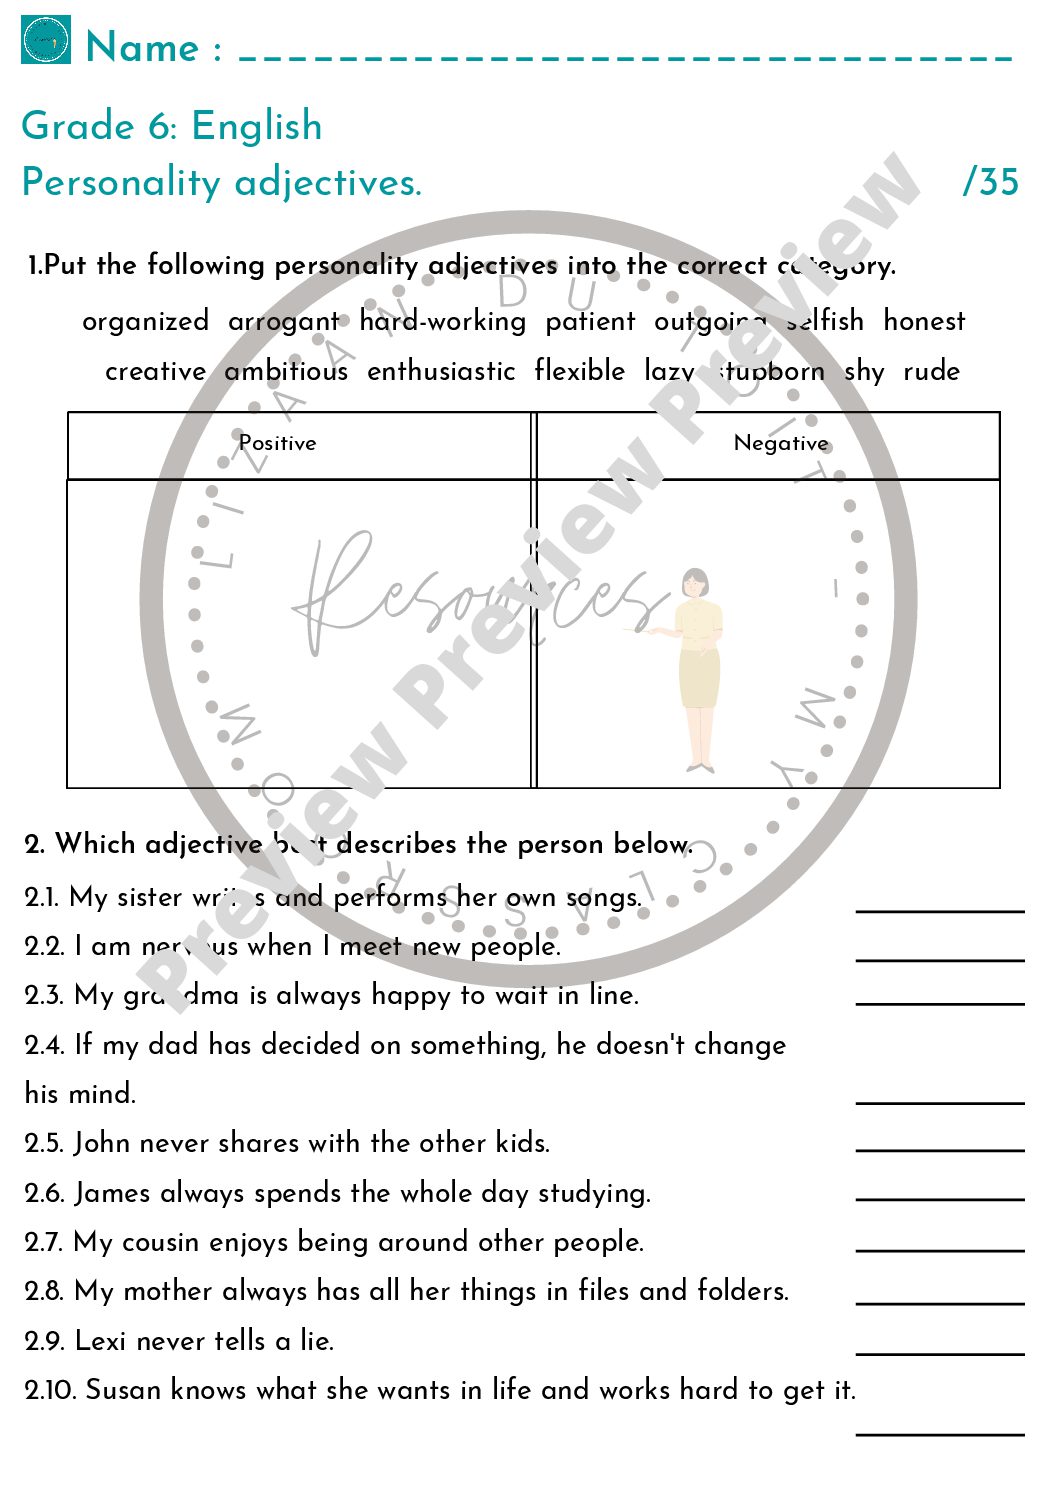 adjectives-of-personality-worksheet